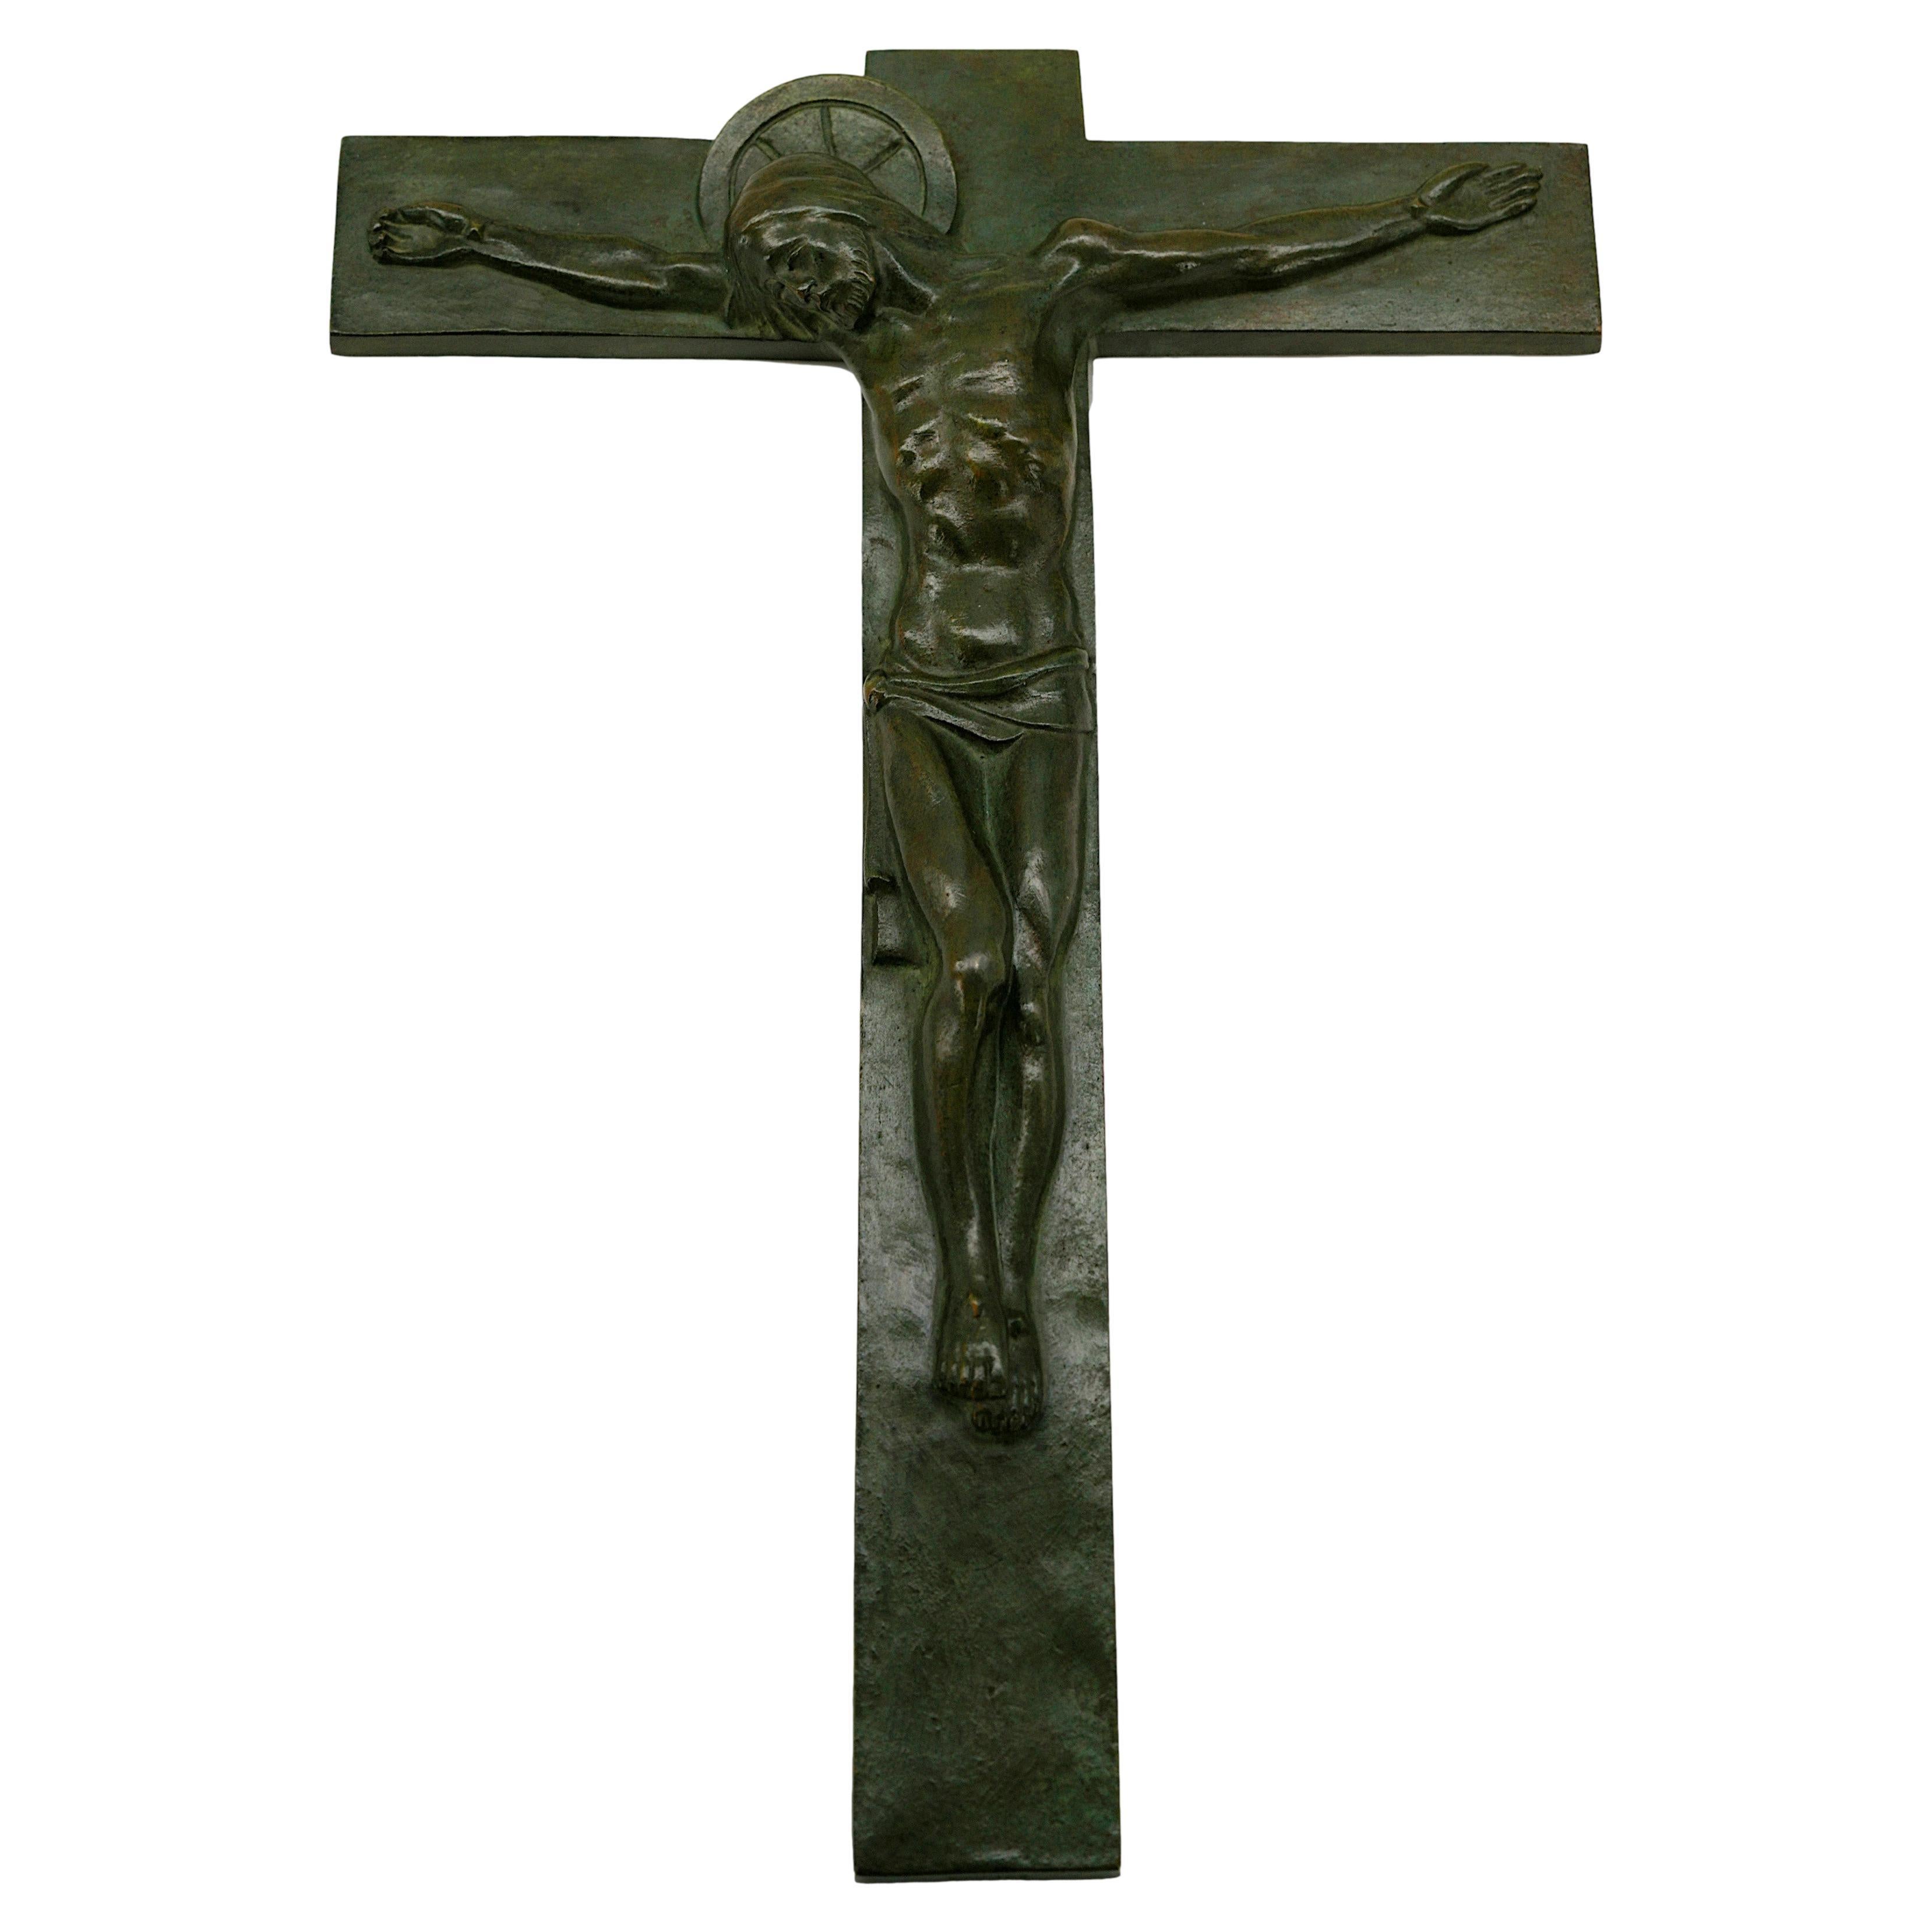 French Art Deco bronze crucifix by HARTMANN, France, 1930s. Height: 10